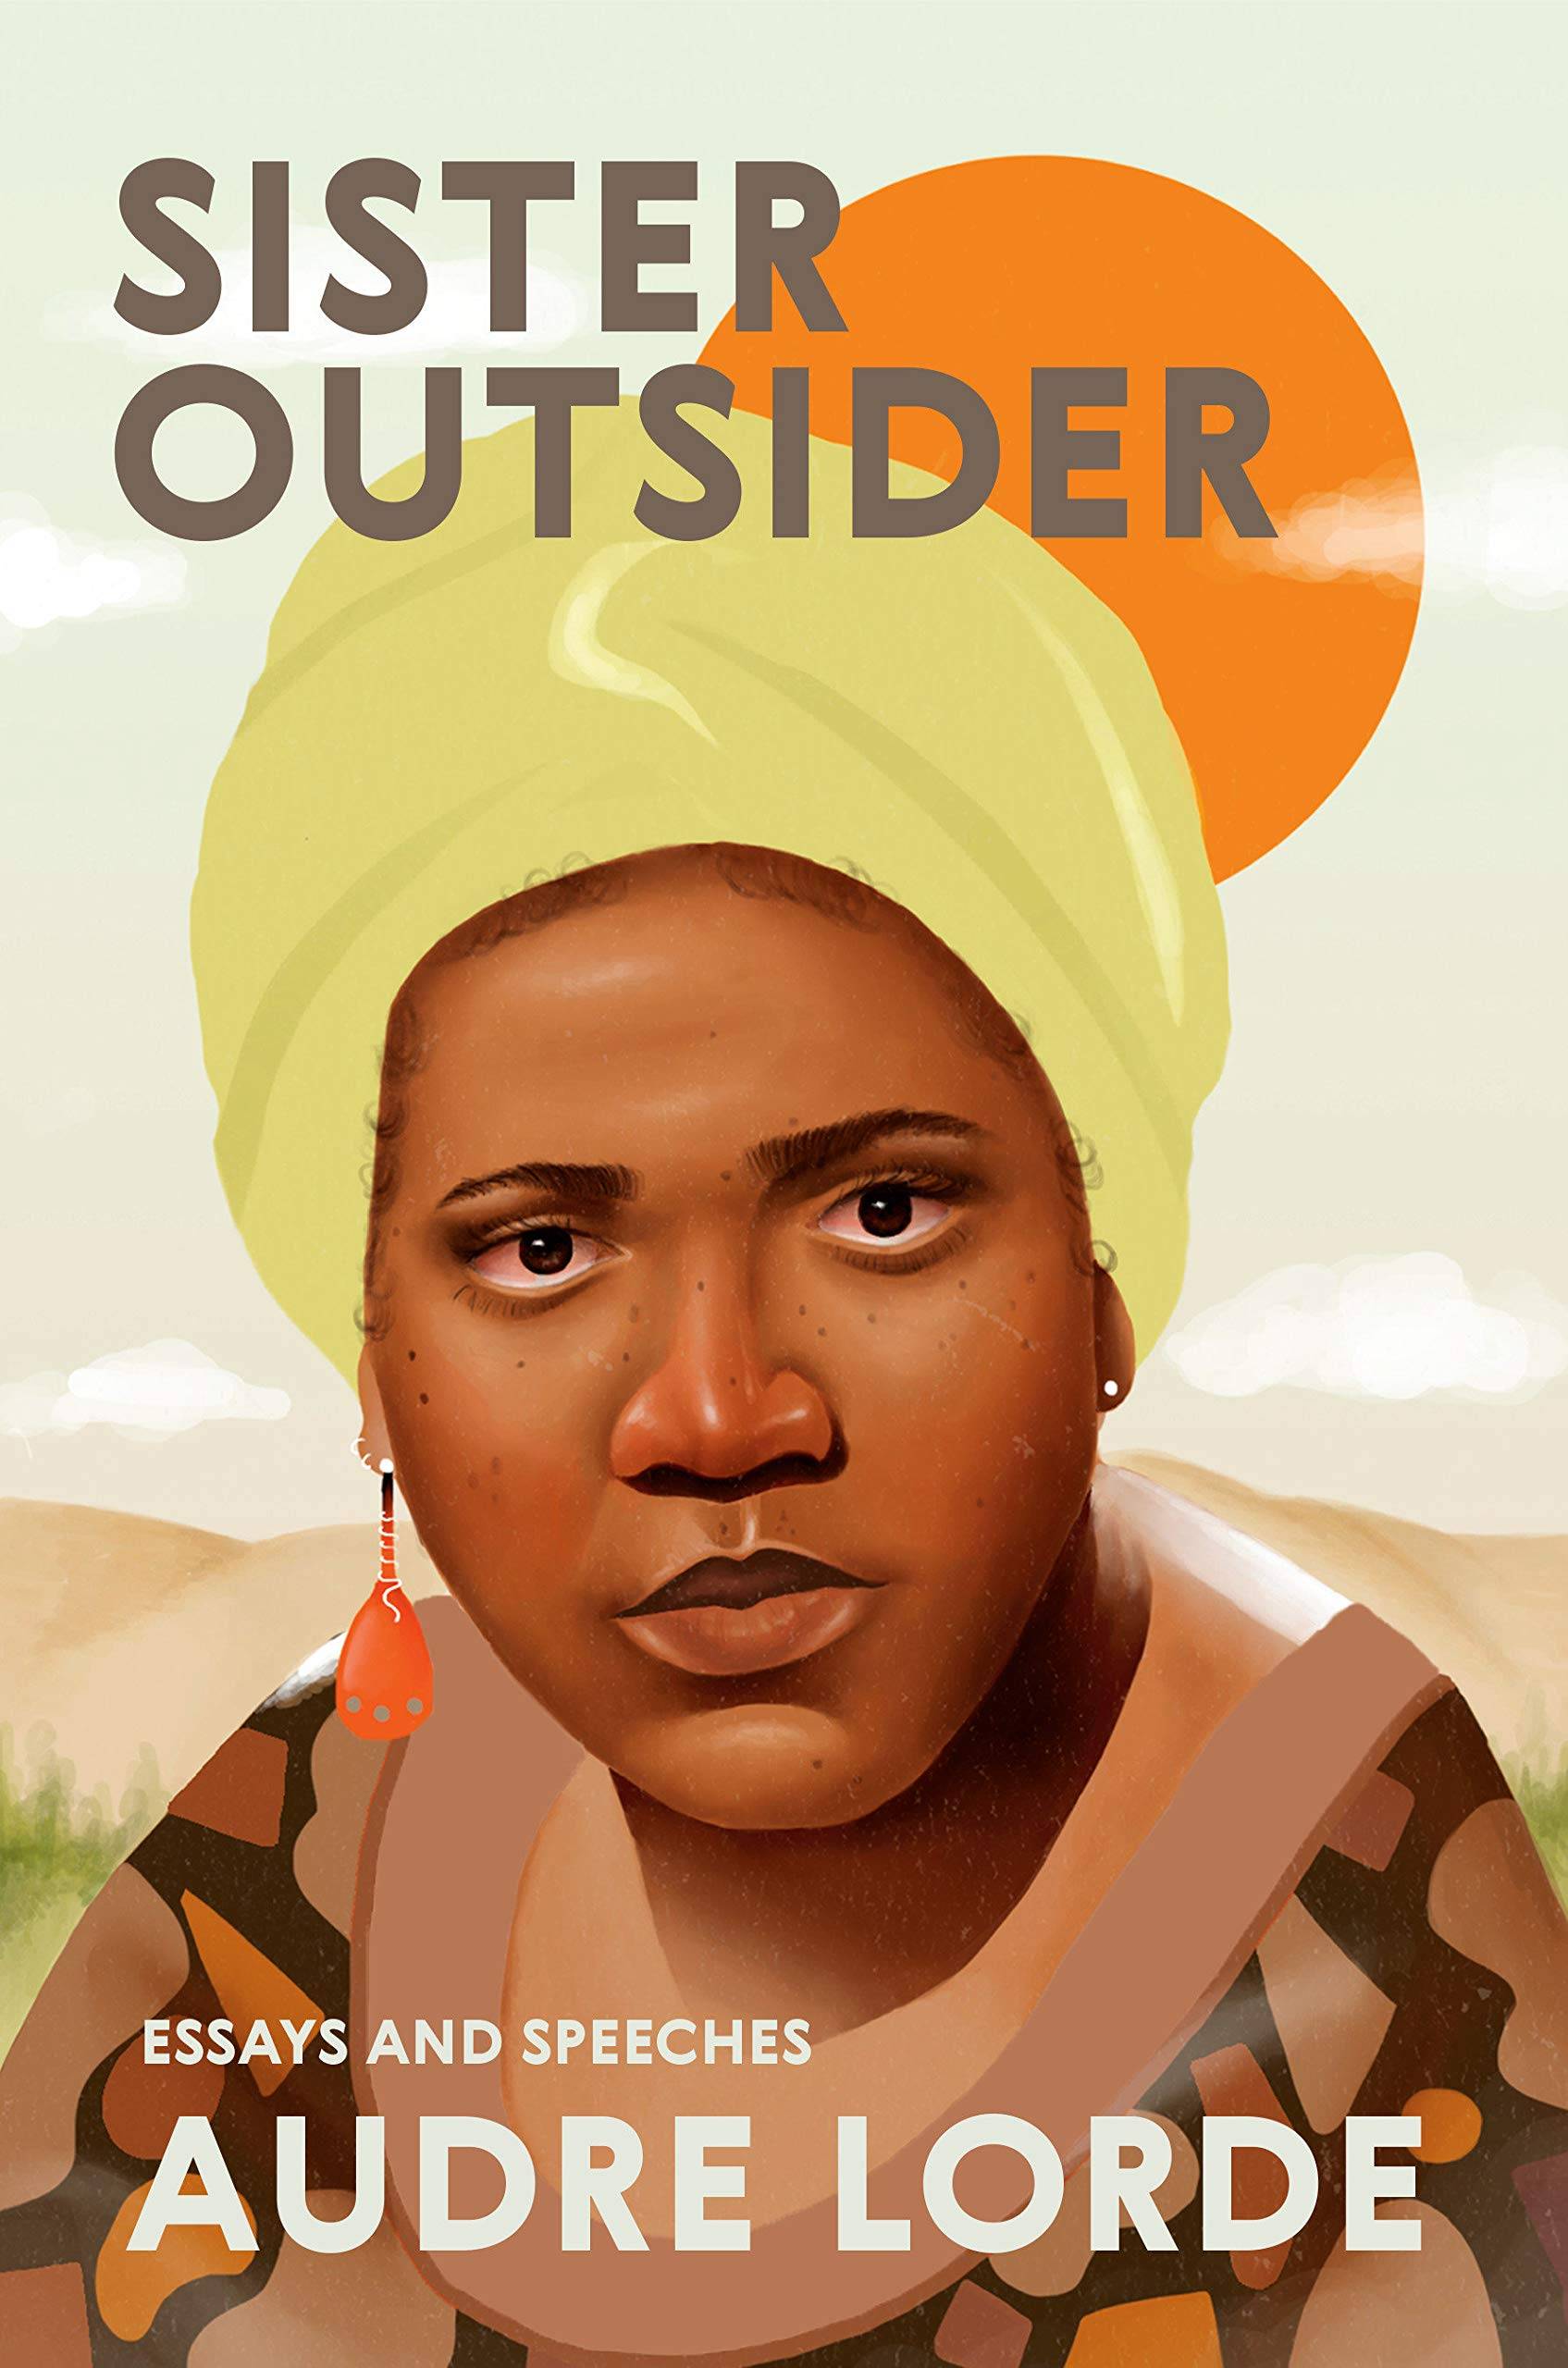 Cover of 'Sister Outsider' by Audre Lourde